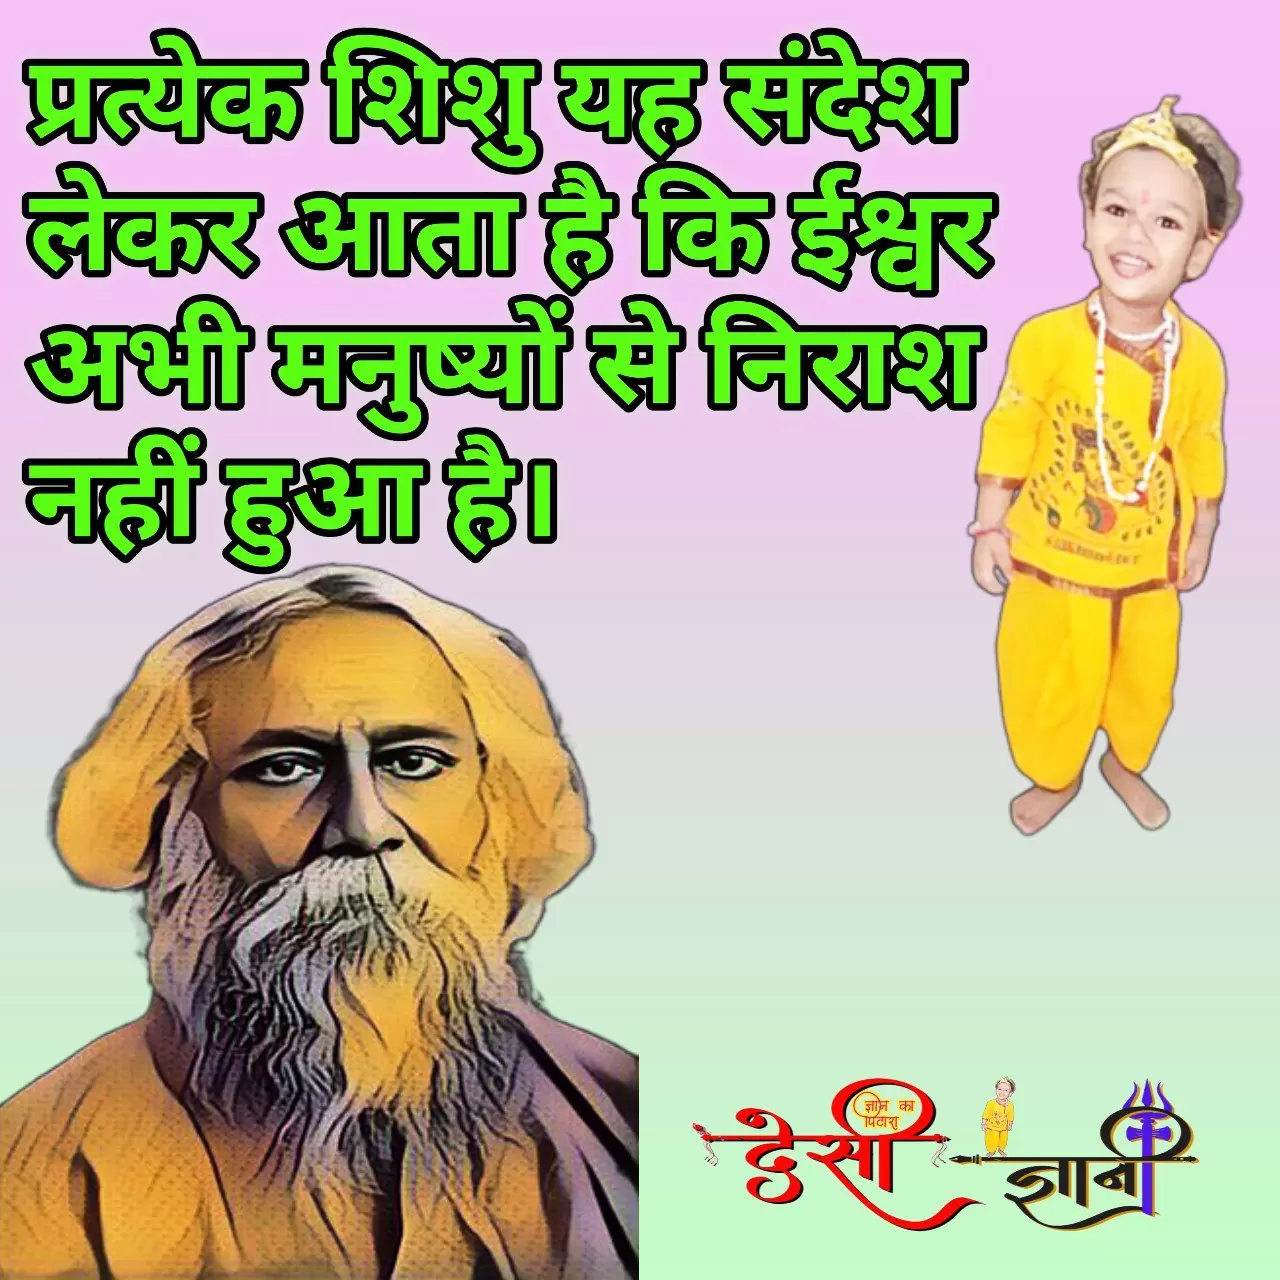 रबीन्द्रनाथ टैगोर की जीवनी और उनके अनमोल विचार | Biography Of Rabindranath Tagore And His Best 25+ Priceless Thoughts About Child Desigyani